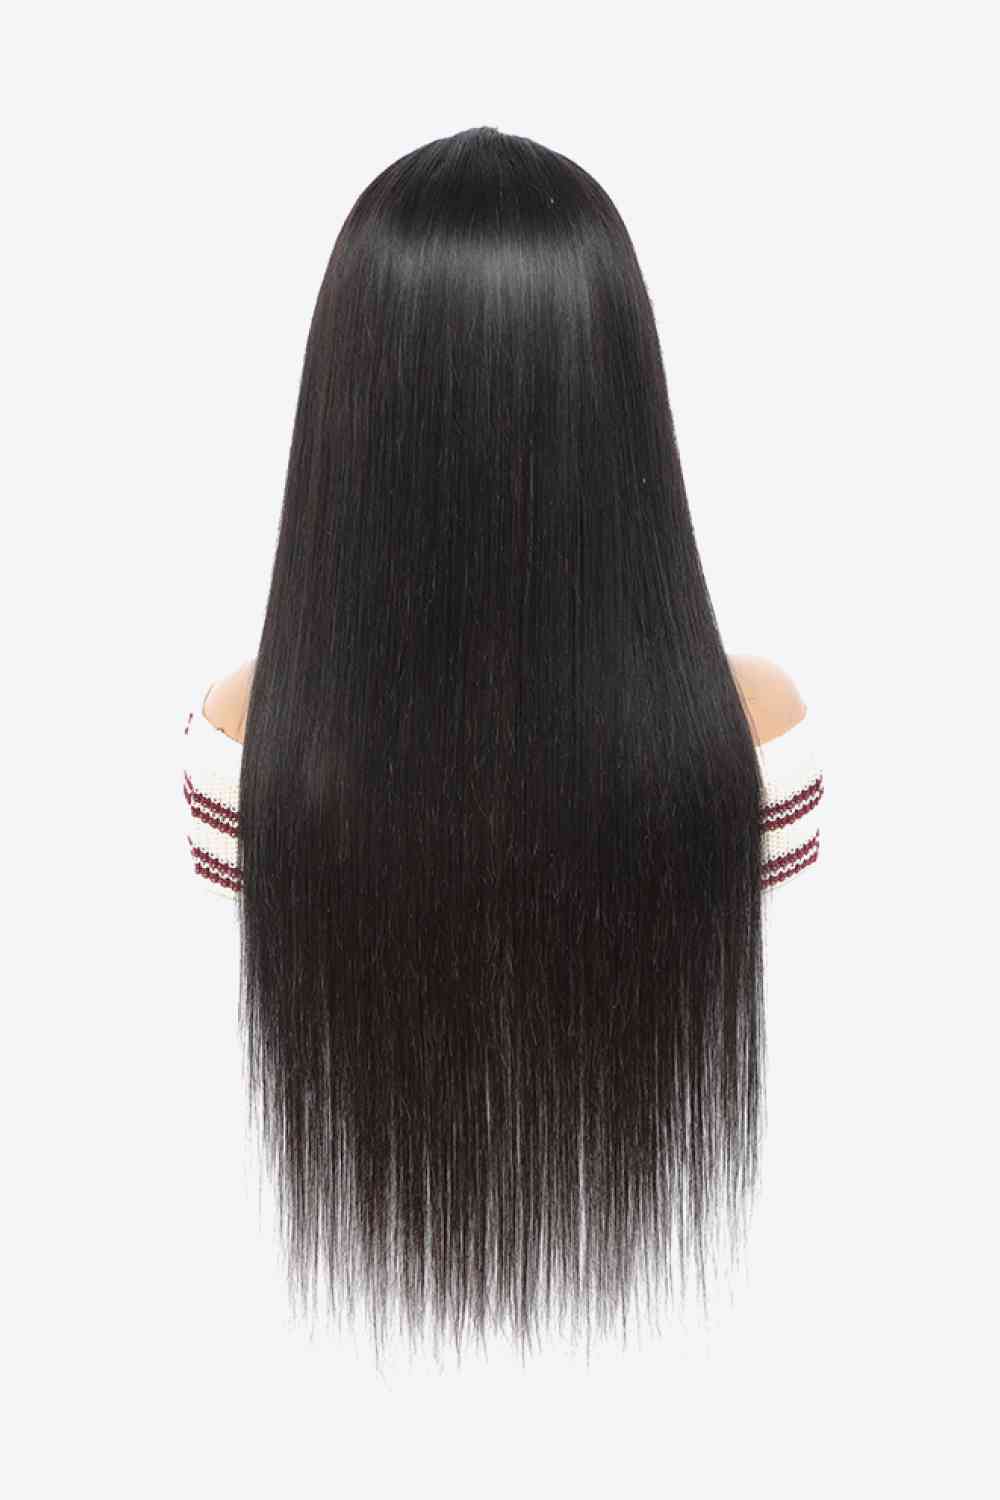 18" 13x4 Lace Front Wigs Virgin Hair Natural Color 150% Density - lolaluxeshop